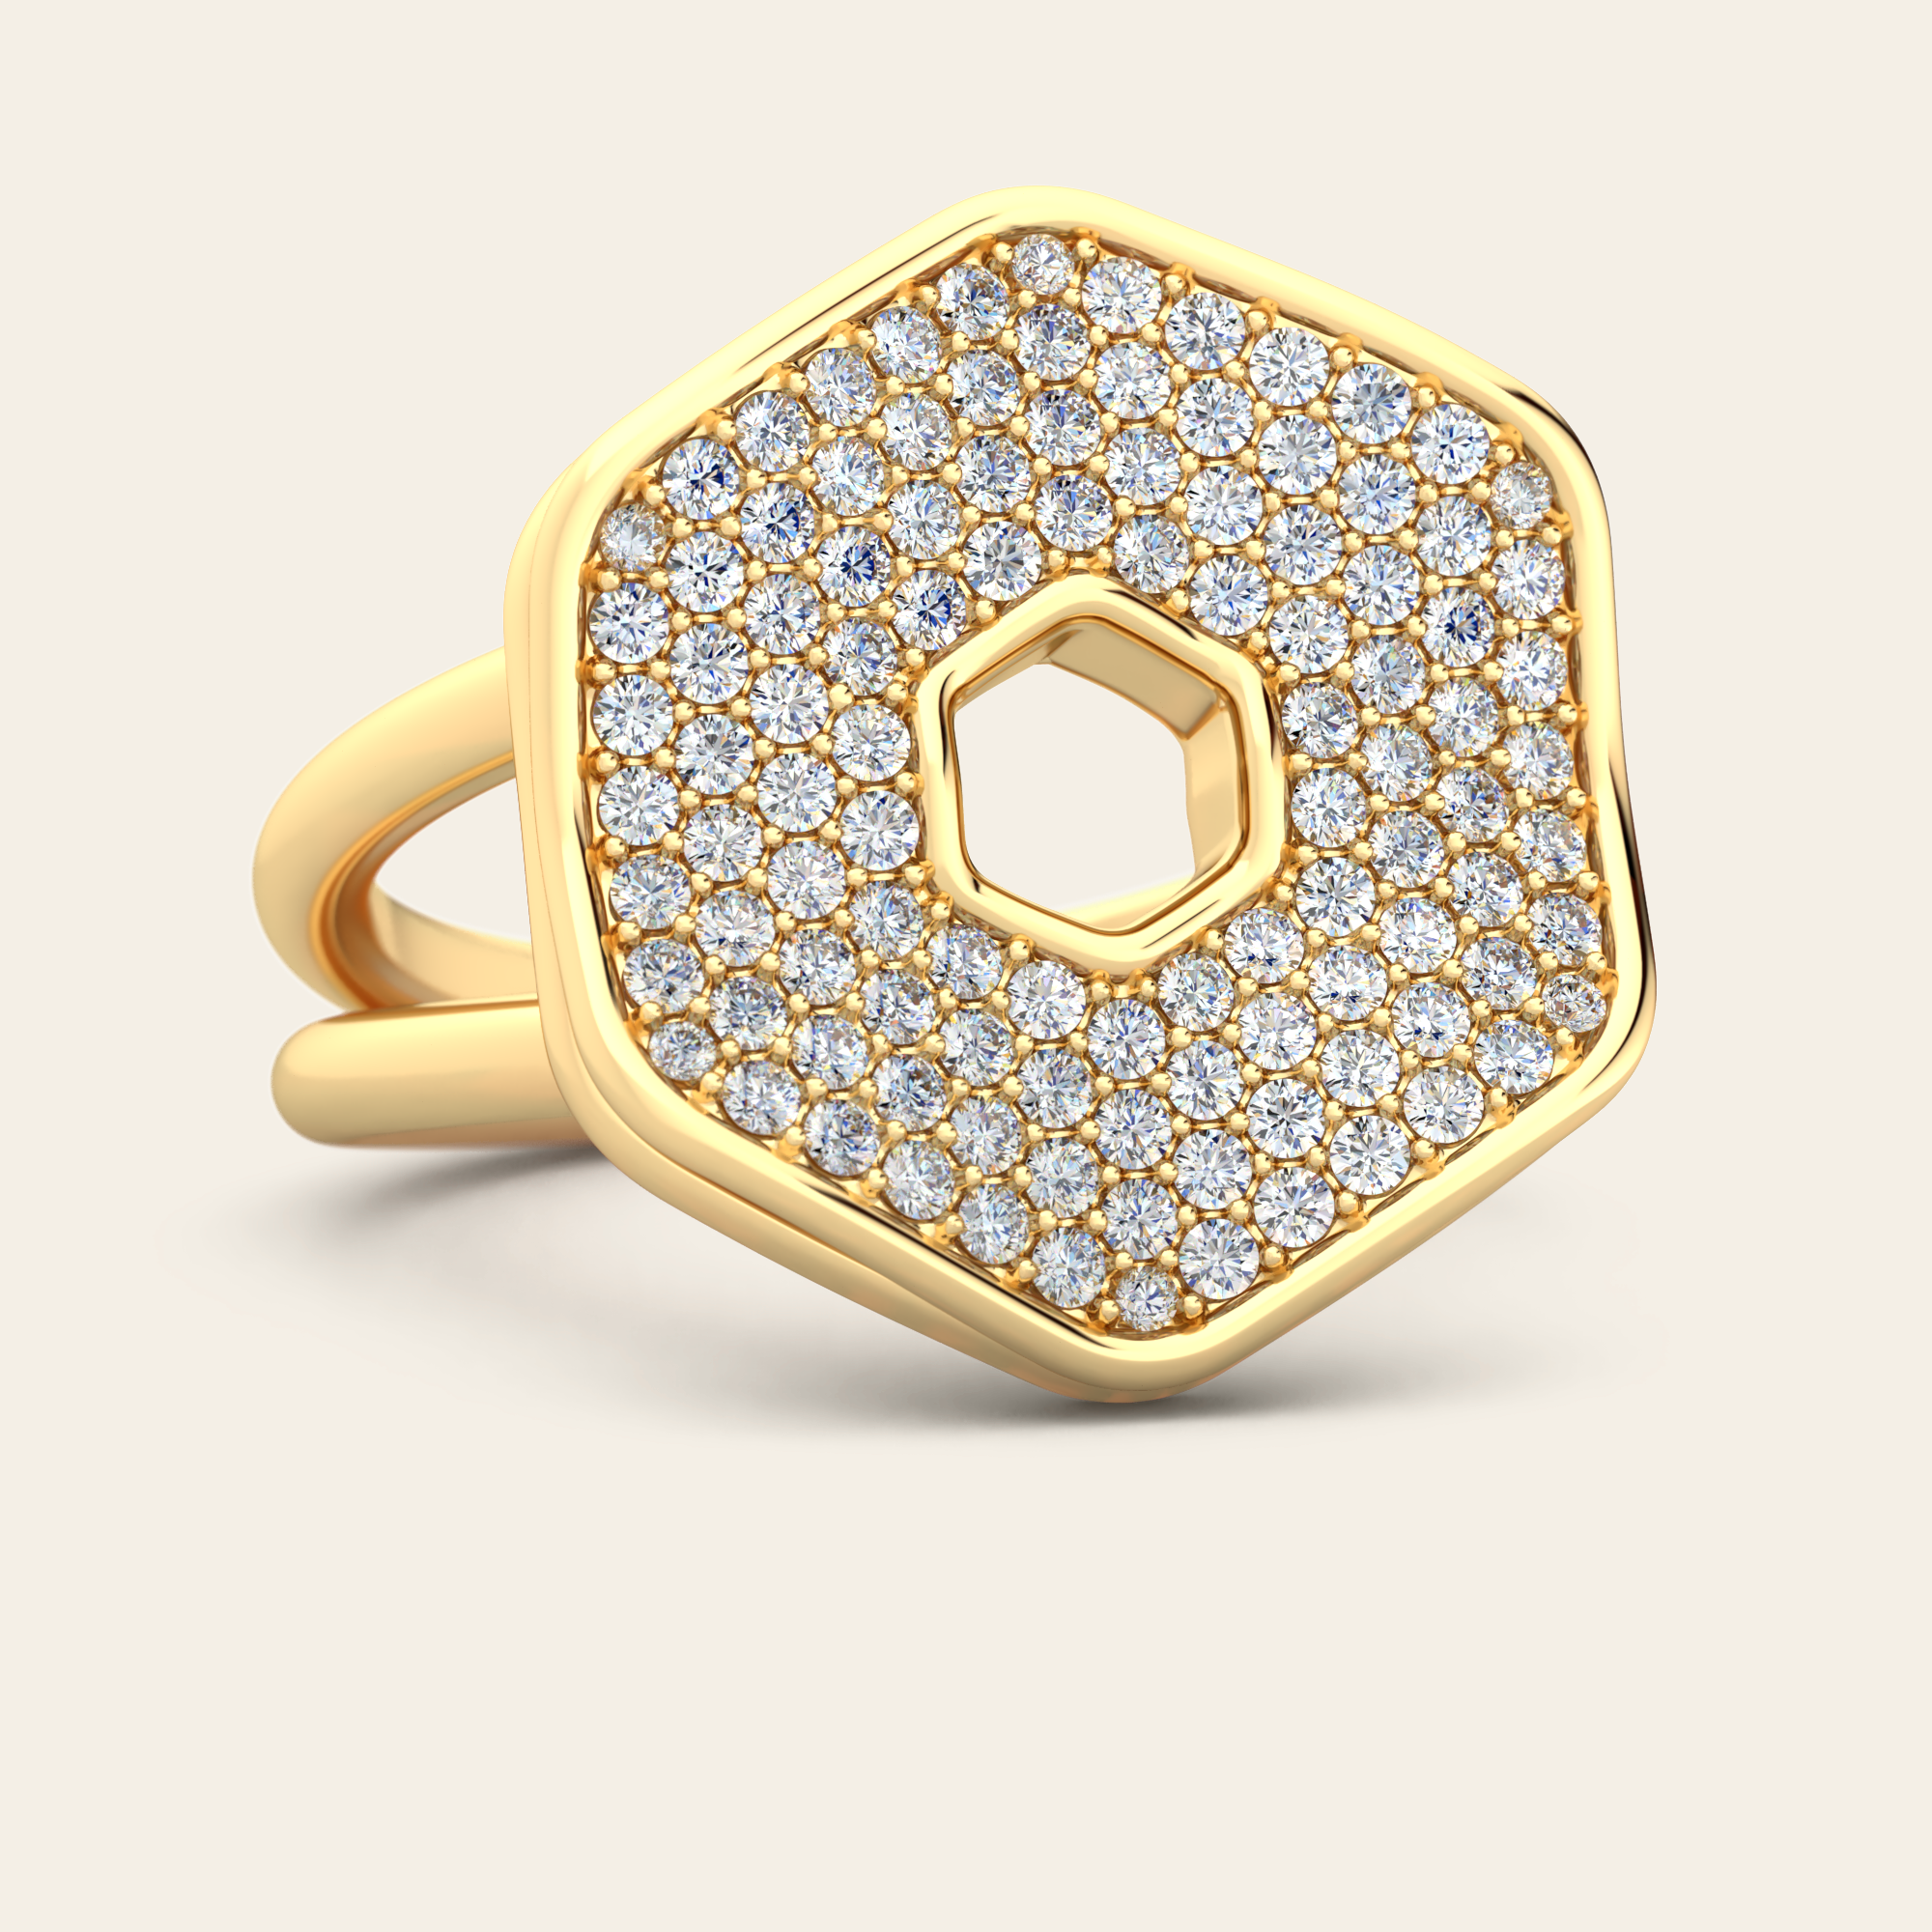 Eclipse Cocktail Ring